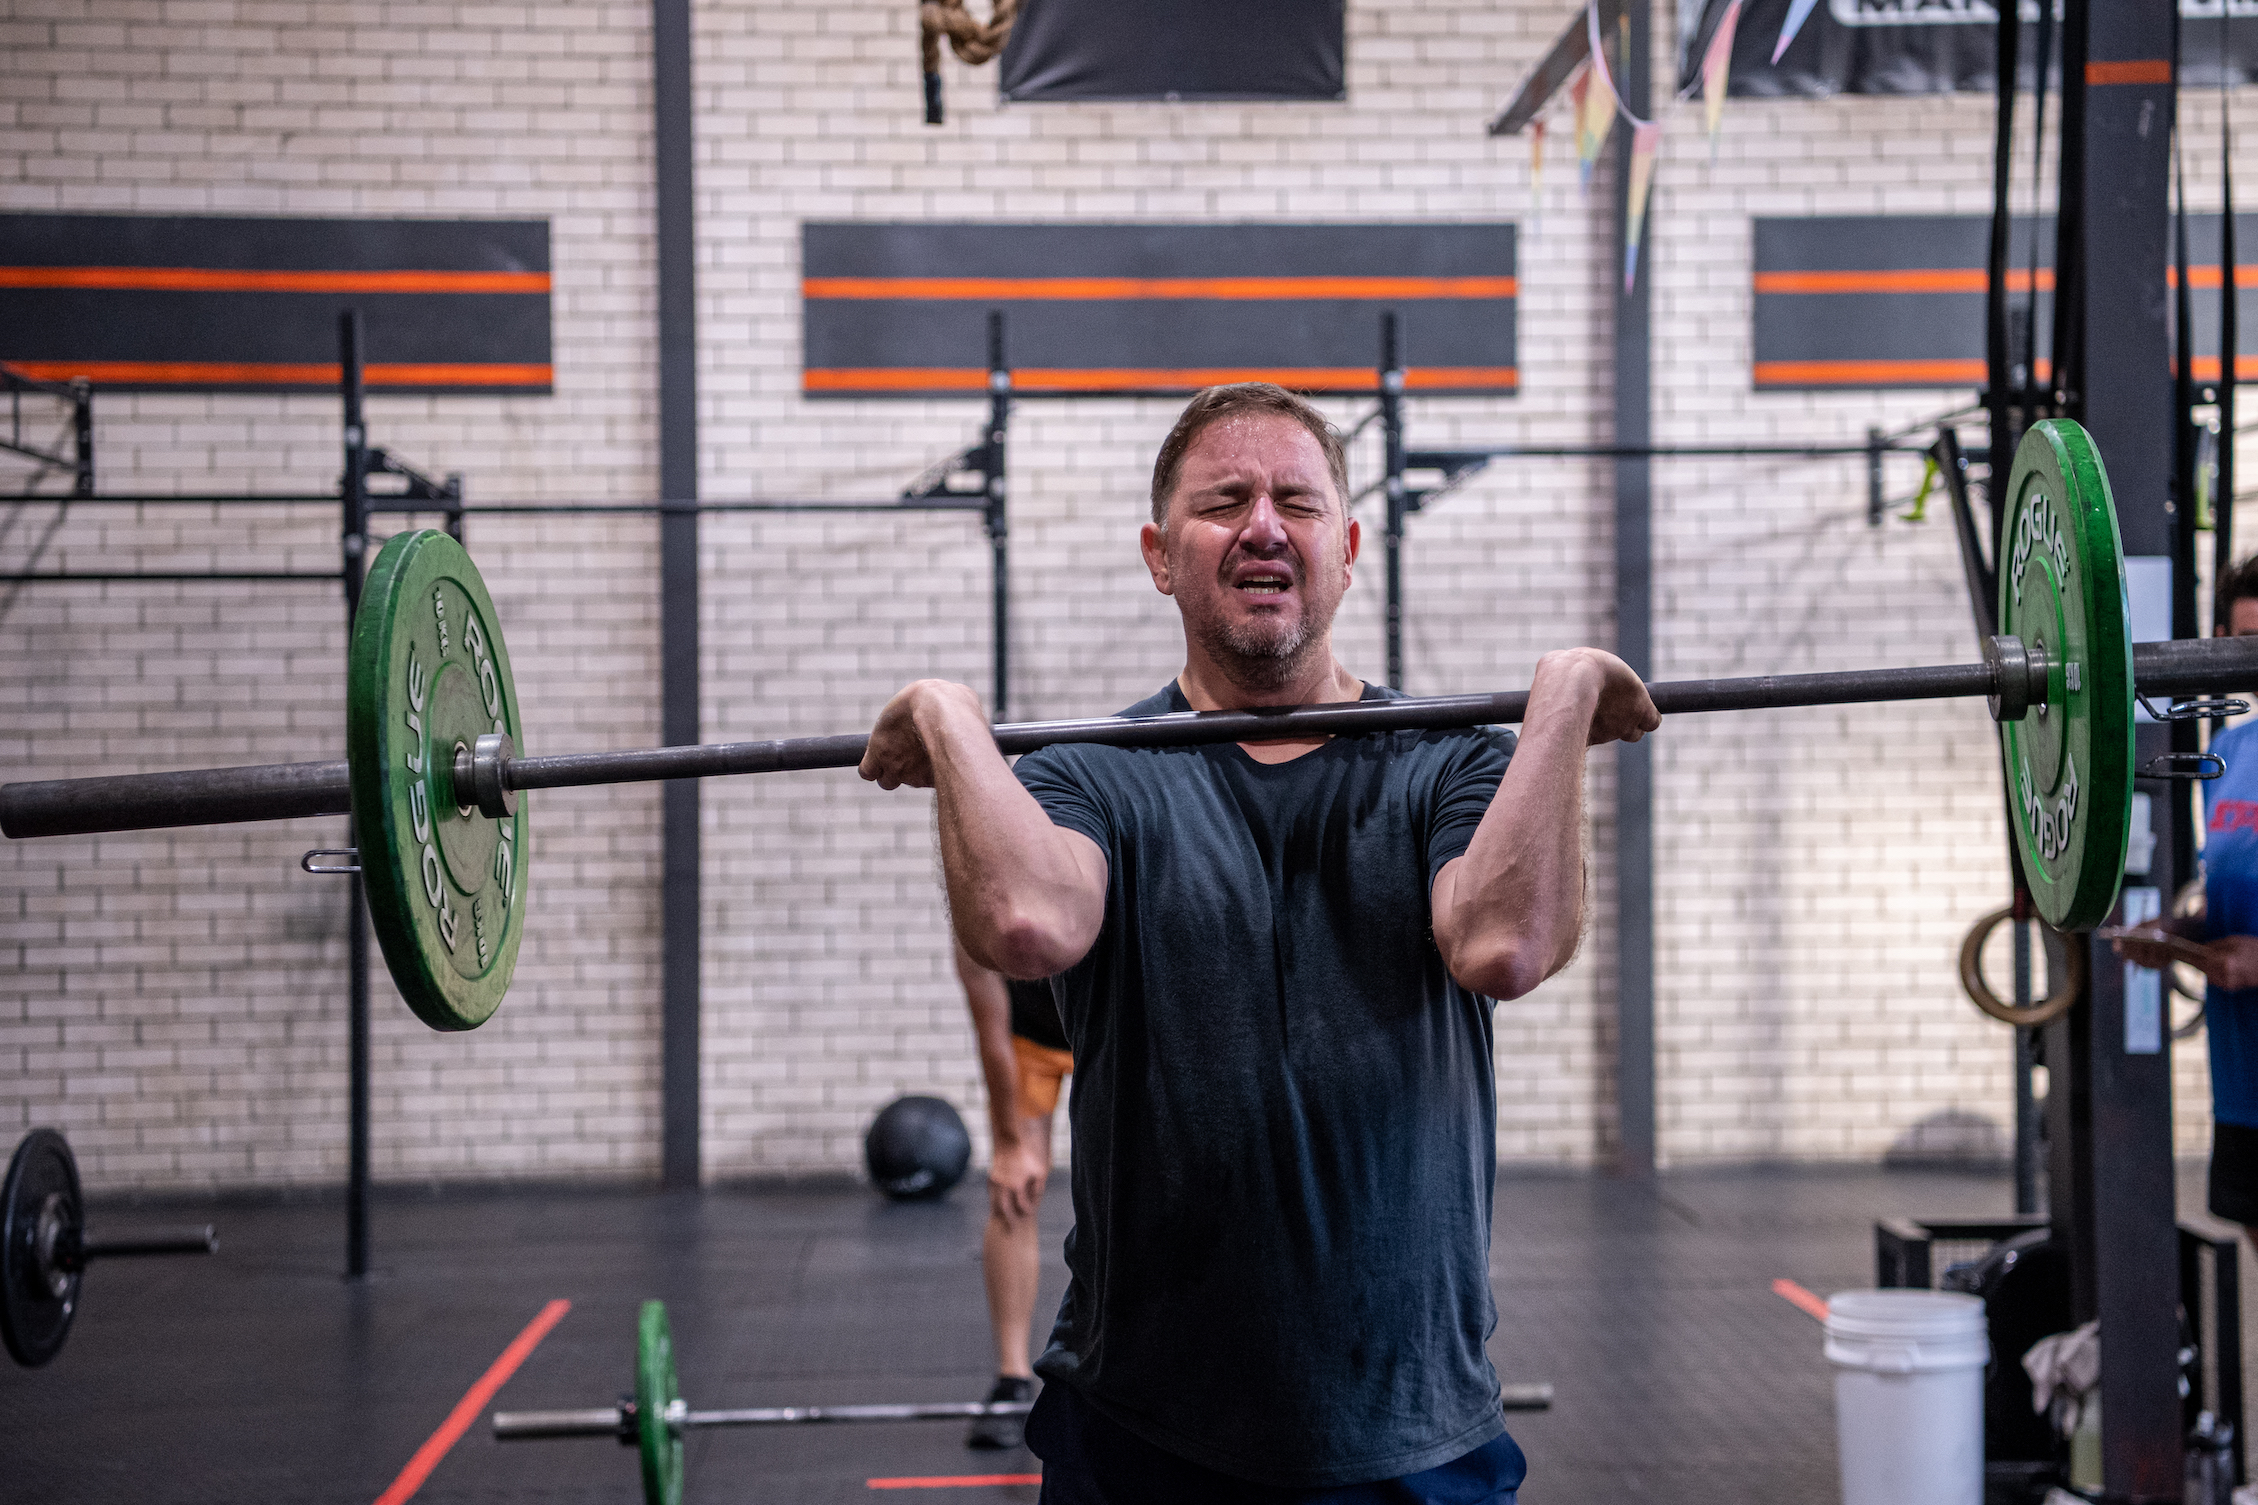 A man grimaces as he completes a barbell clean